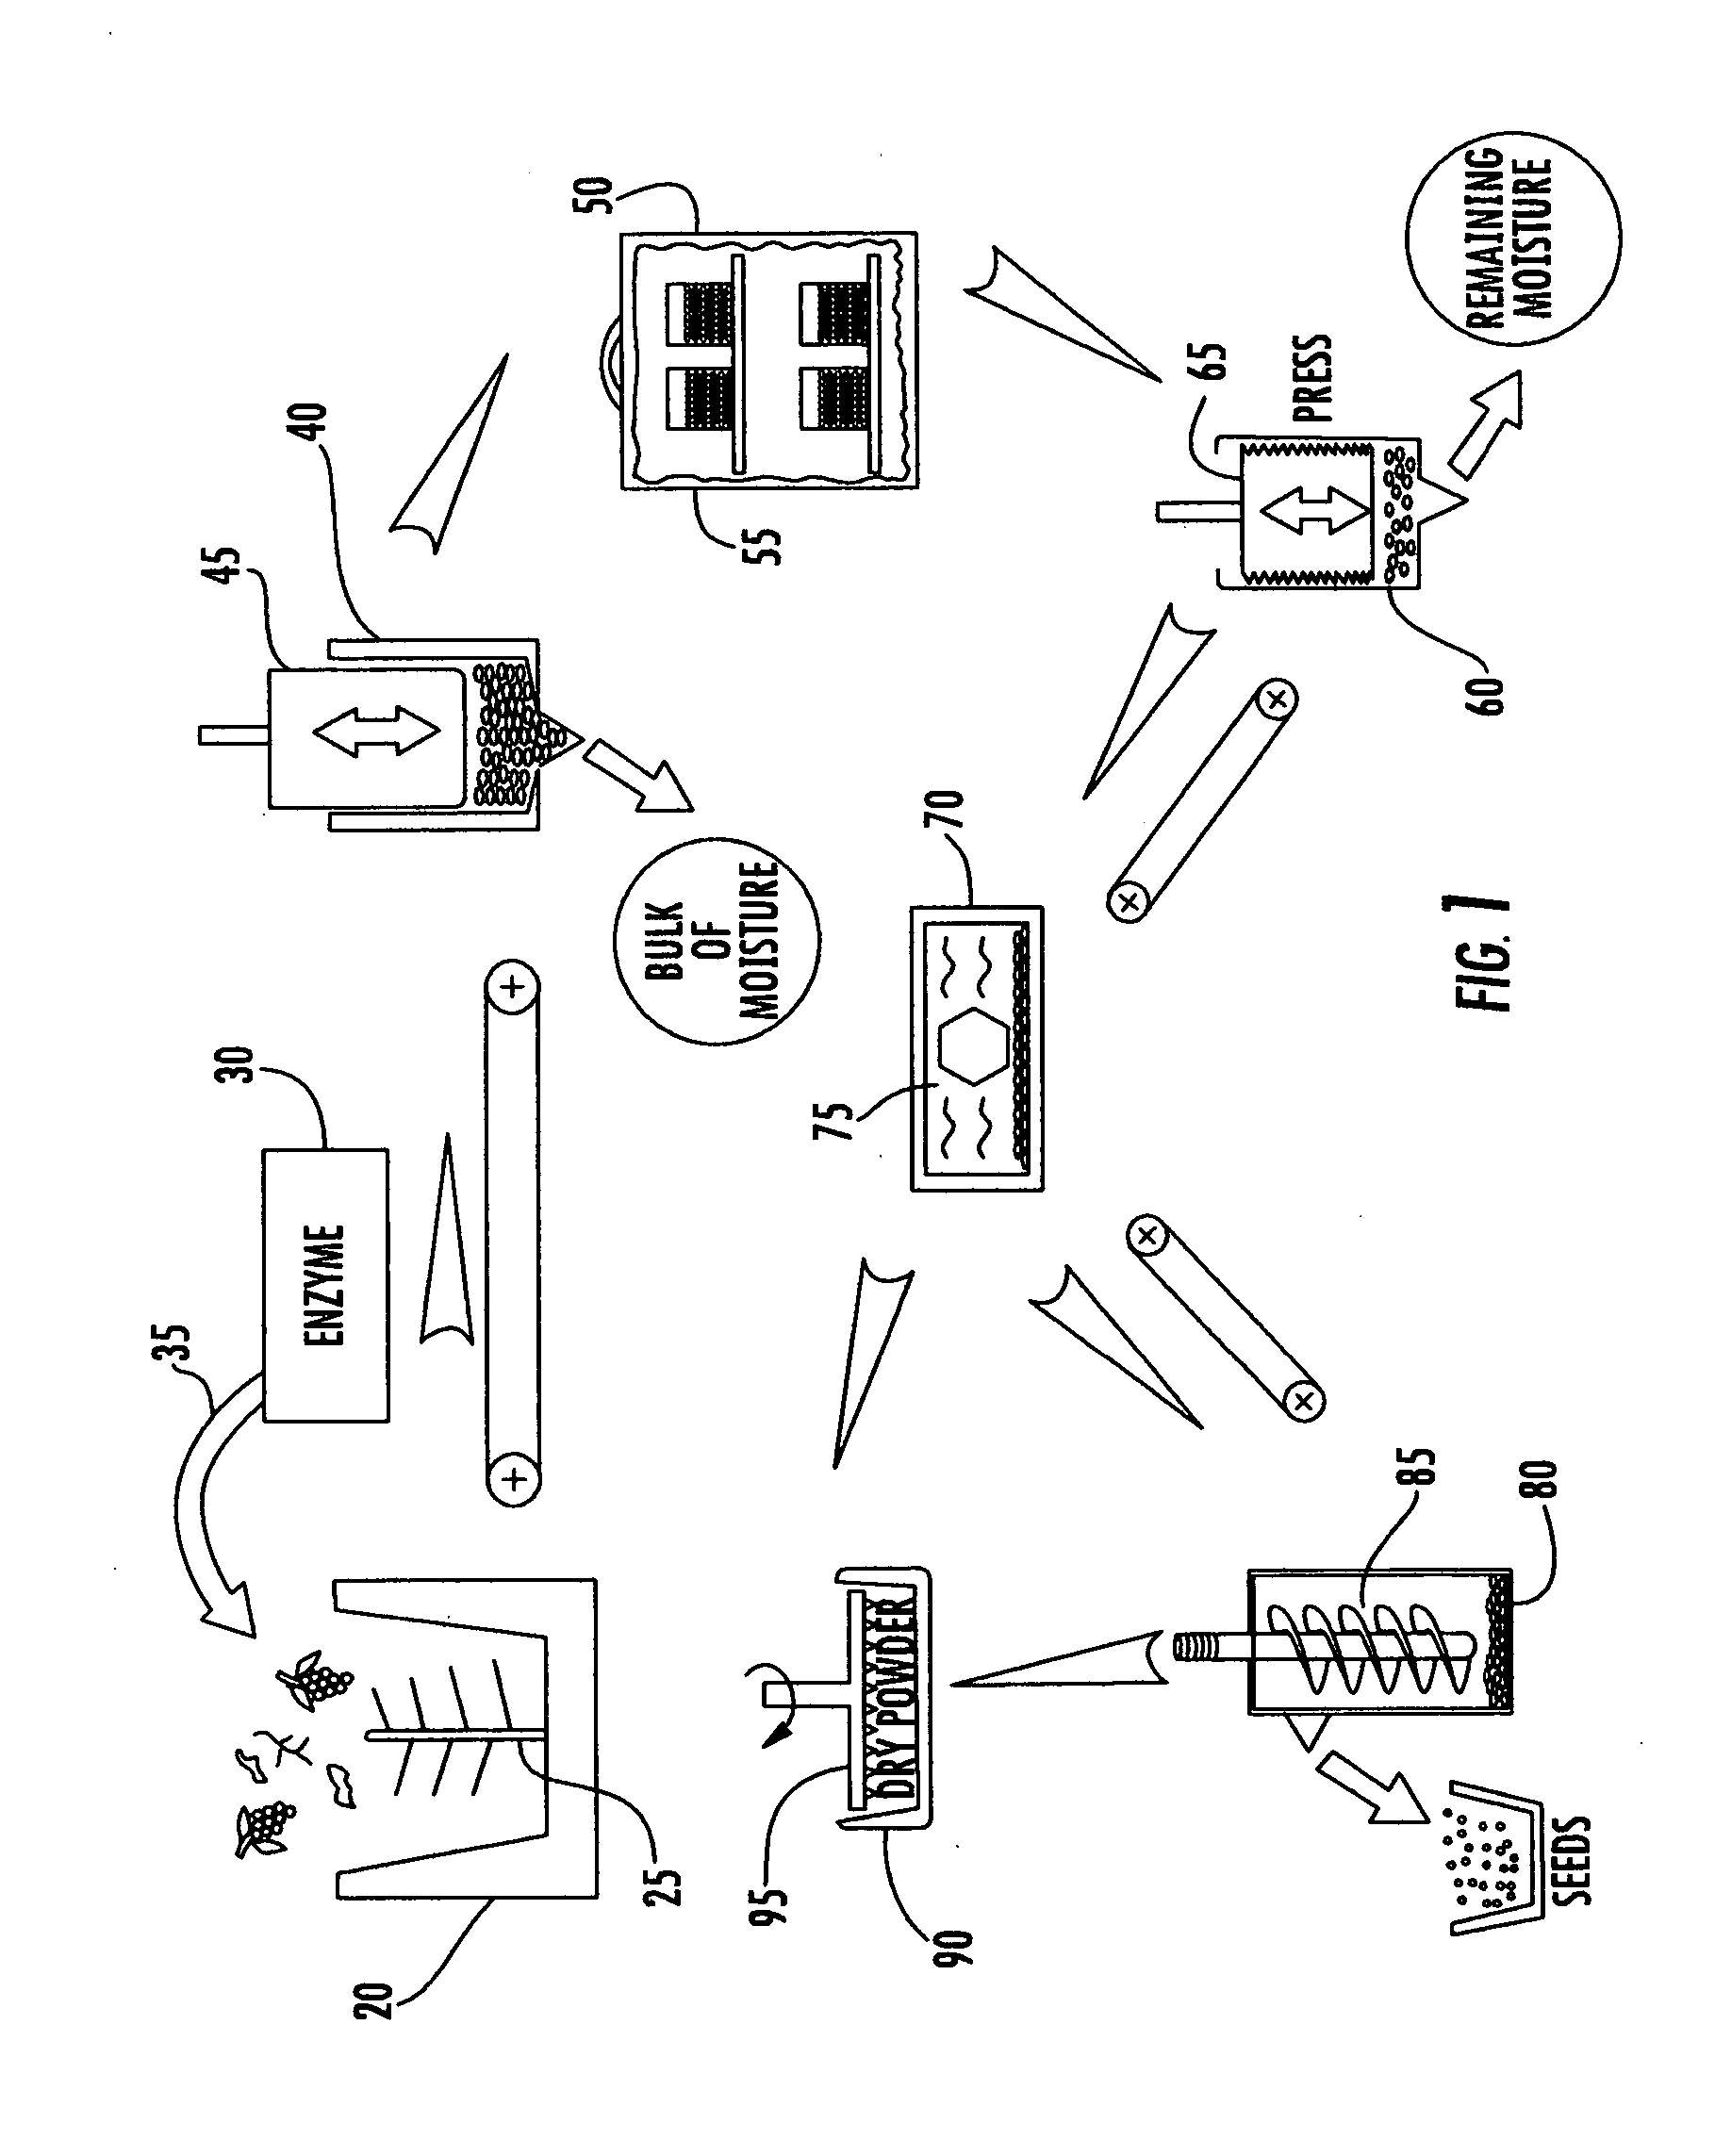 Method for processing organic plant matter into dry powder, oil and juice products